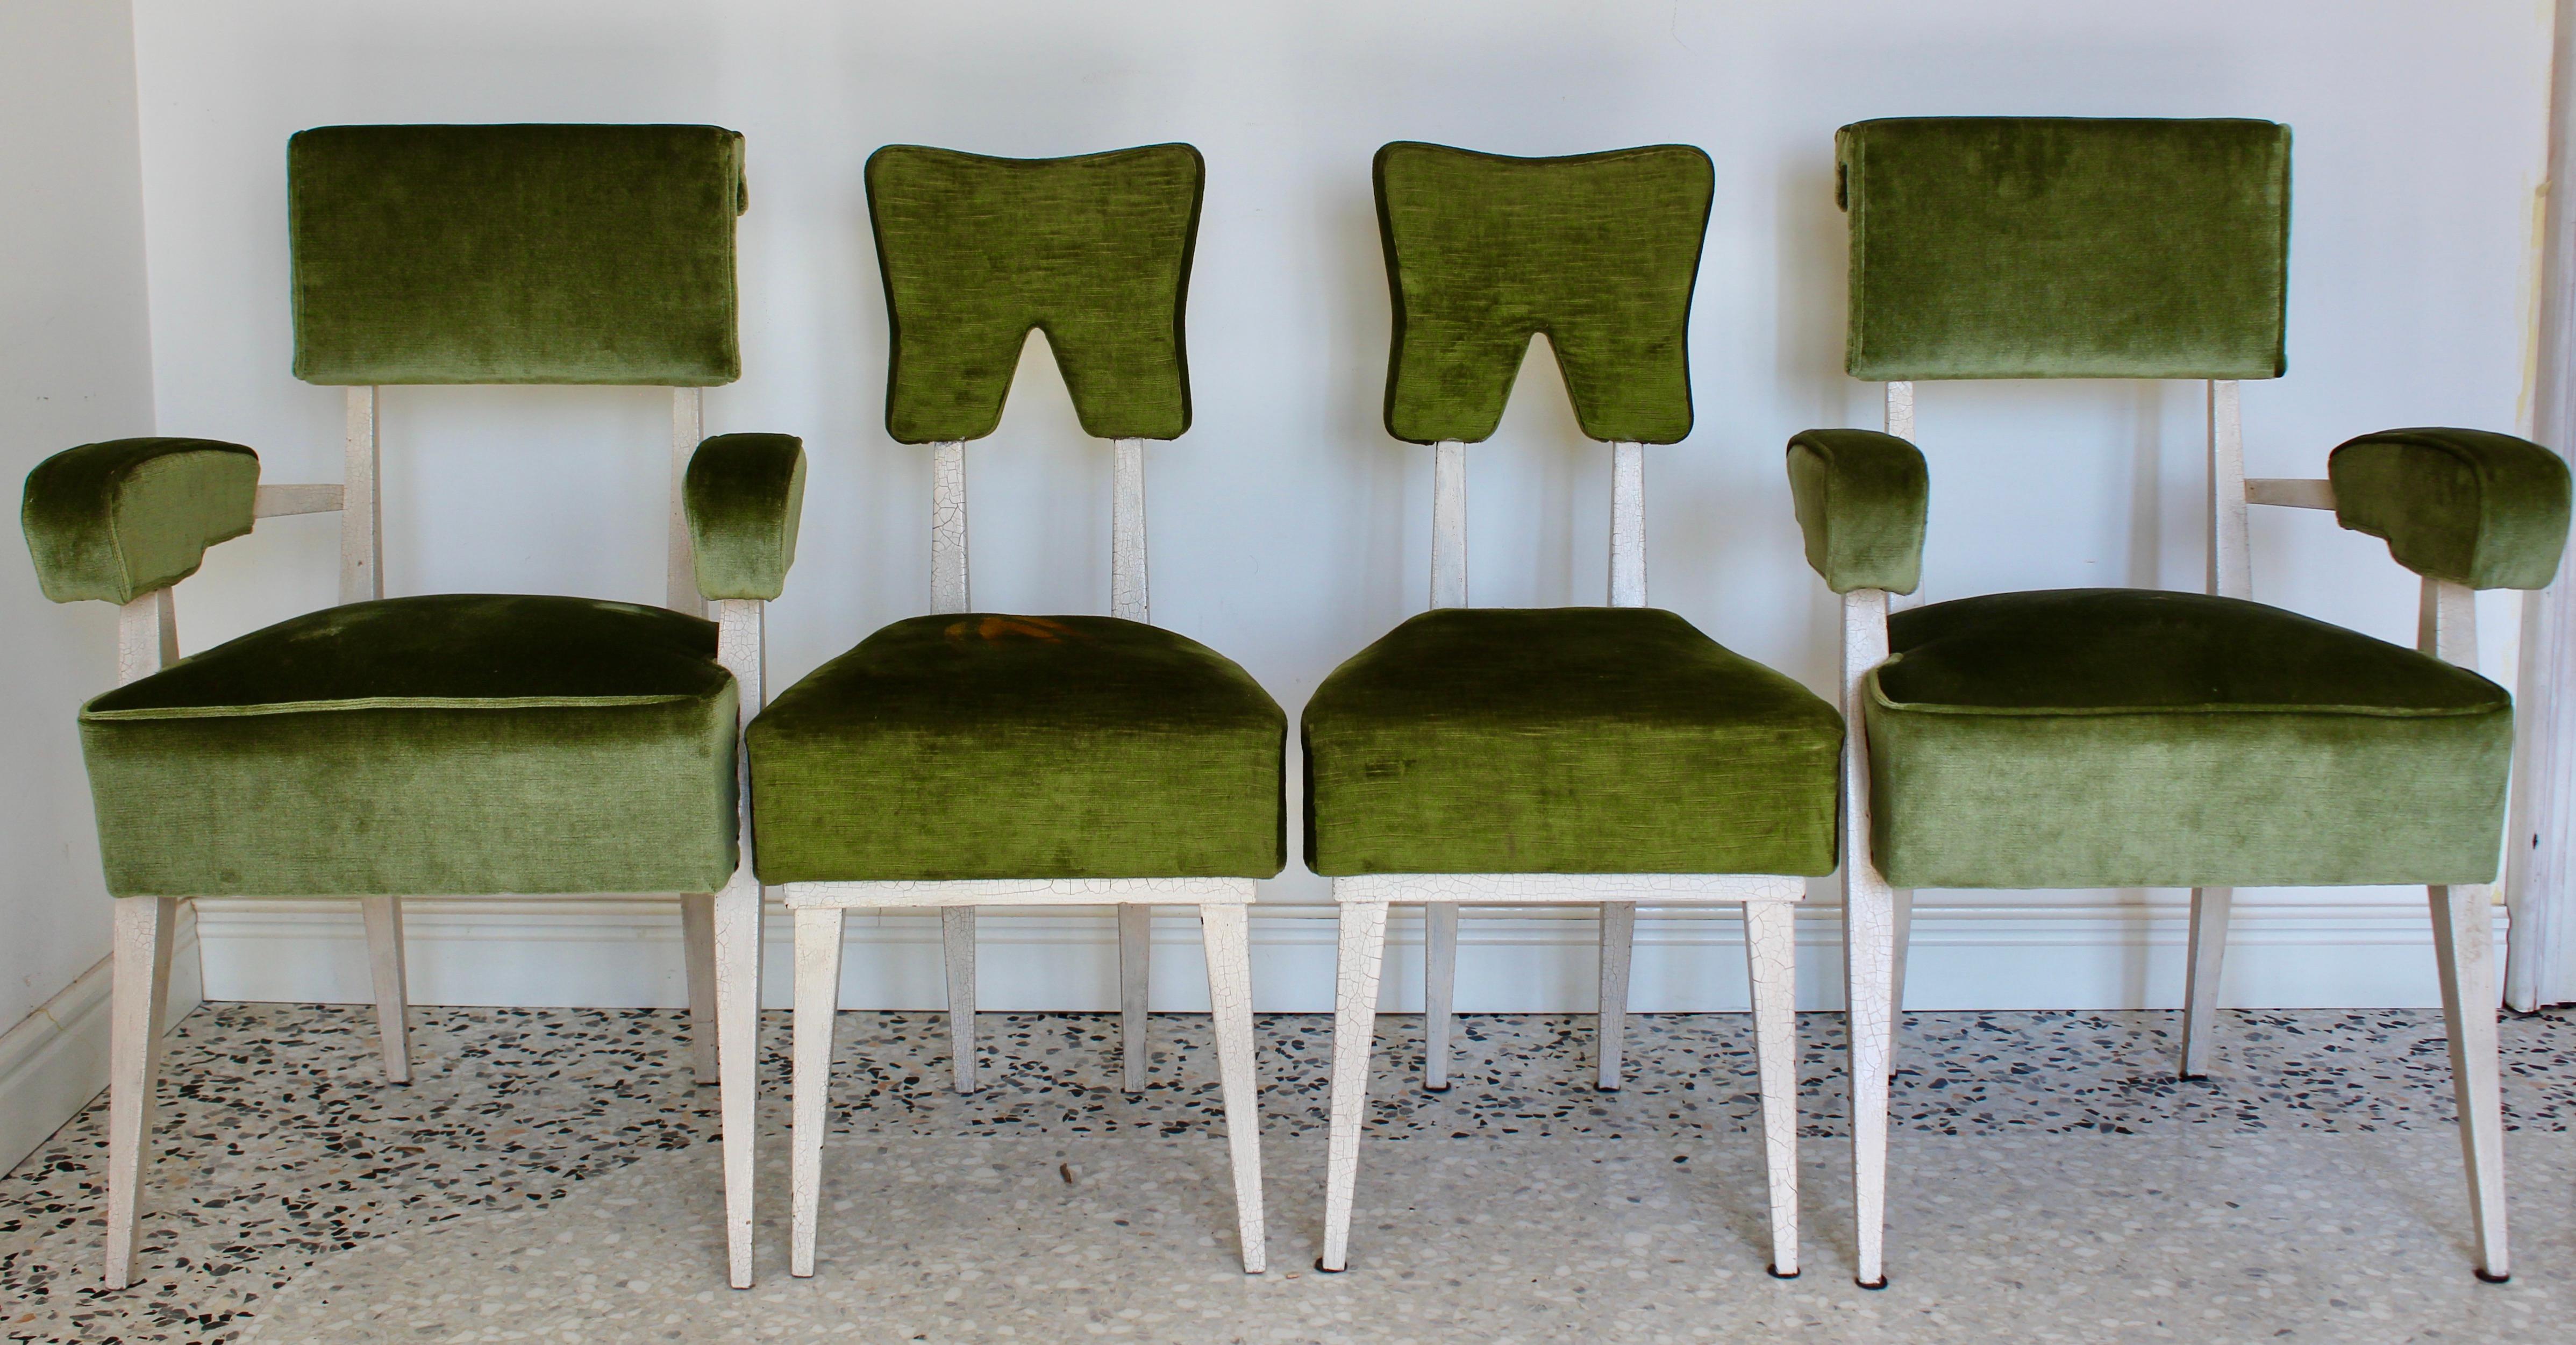 Lacquered Mid-Century Modern Four Green Chairs Attribuited to Bbpr Studio, Italy, 1950s  For Sale